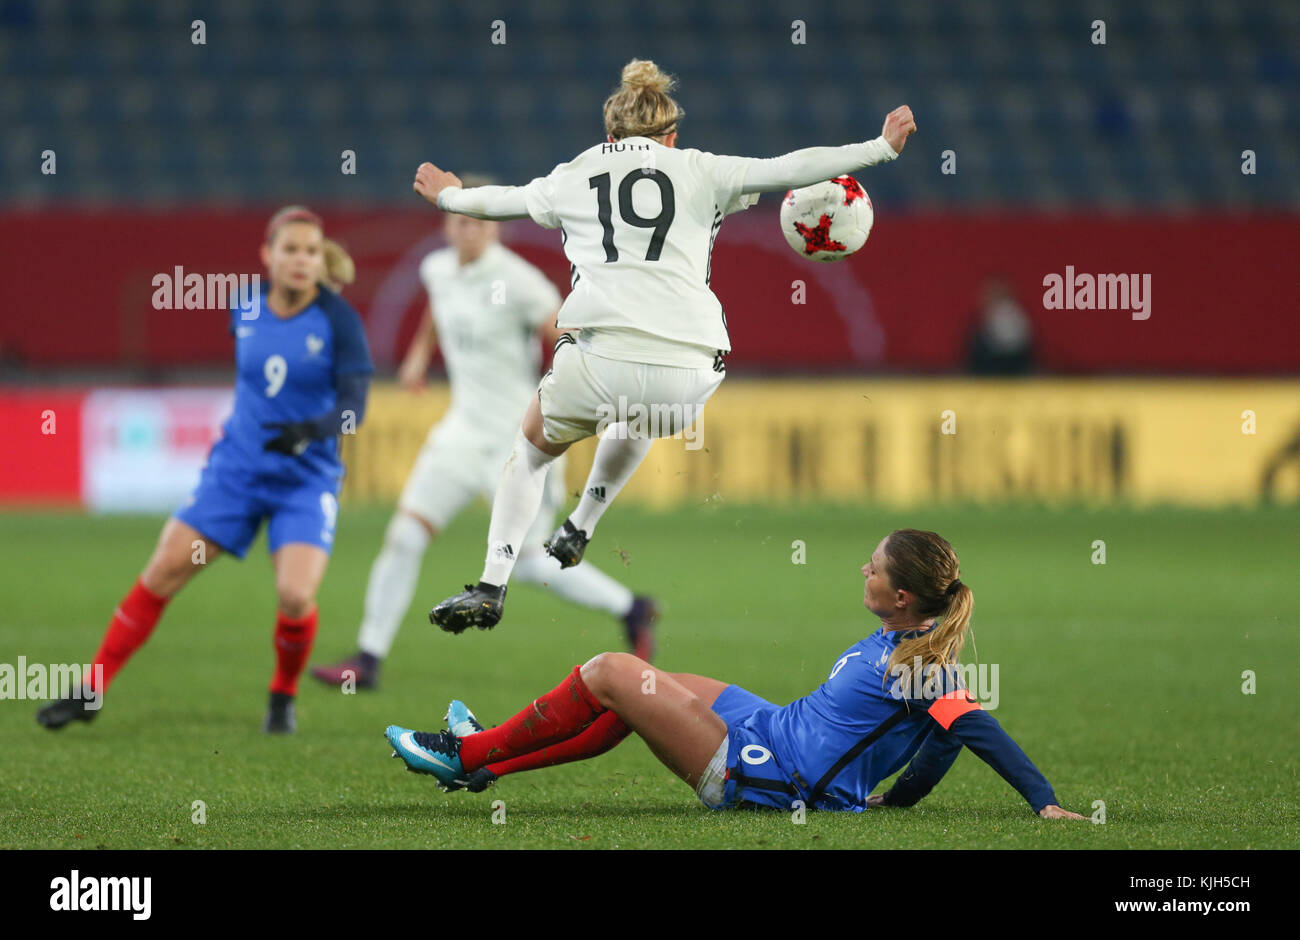 Germany's Svenja Huth (L) in action against France's Amandine Henry (R) during the women's international friendly soccer match between Germany and France in the Schueco Arena stadium in Bielefeld, Germany, 24 November 2017. Photo: Friso Gentsch/dpa Stock Photo